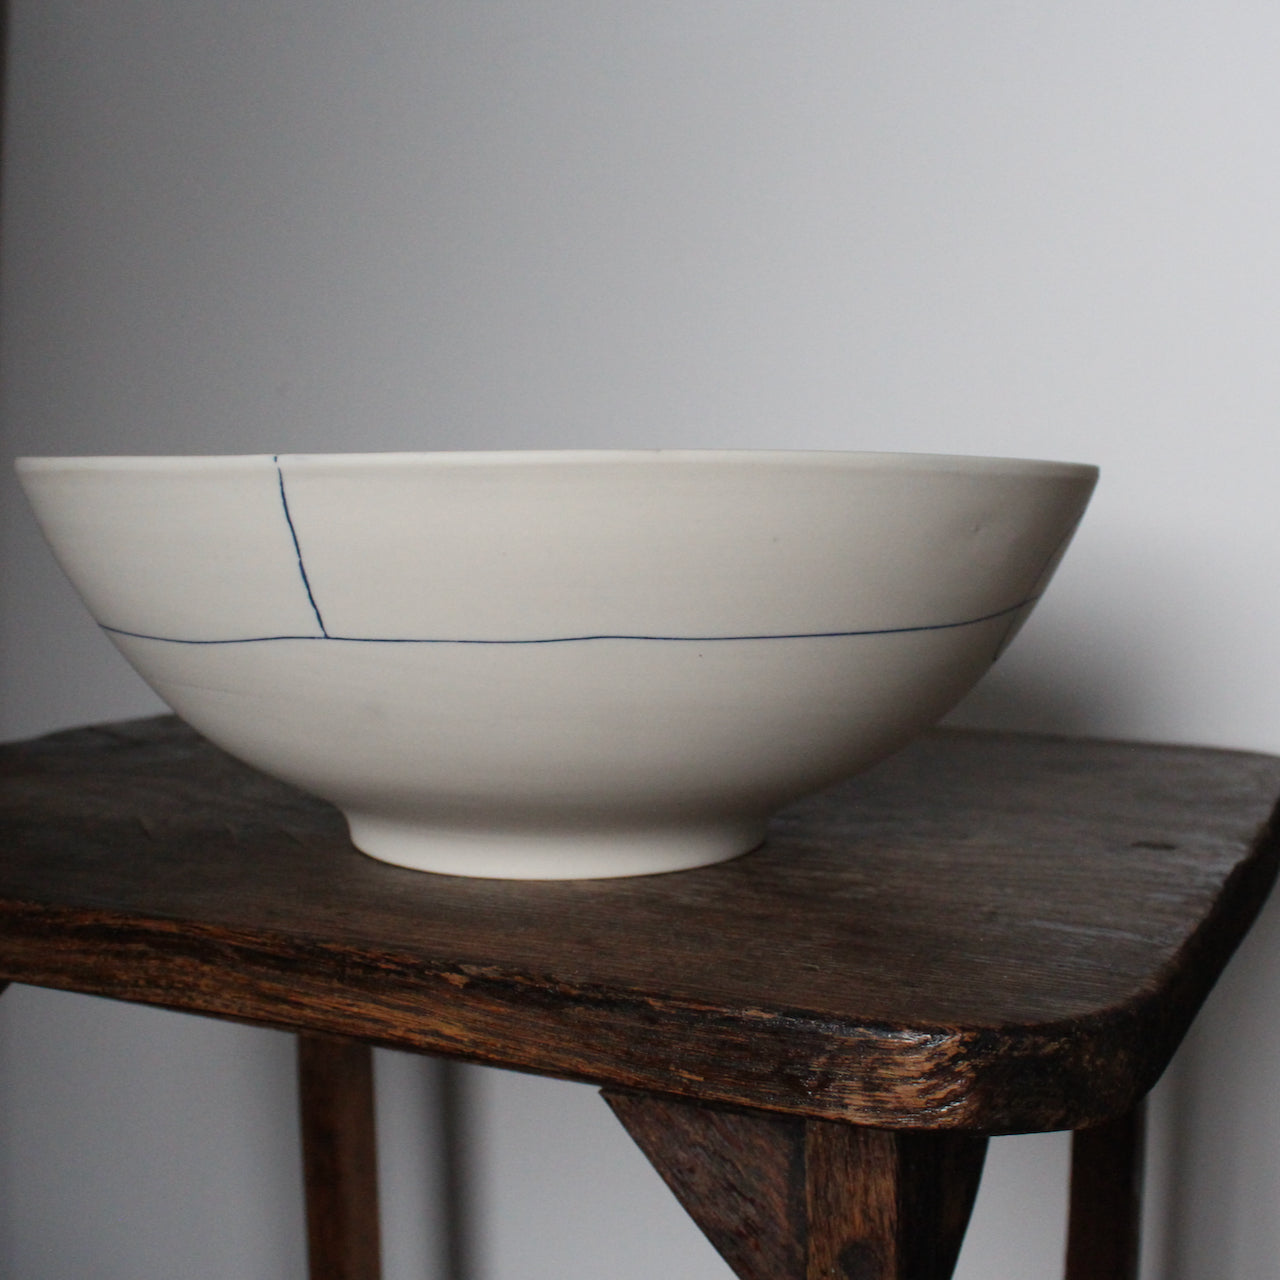 large white porcelain bowl with two blue lines on exterior by UK ceramicist Liz O'Dwyer 